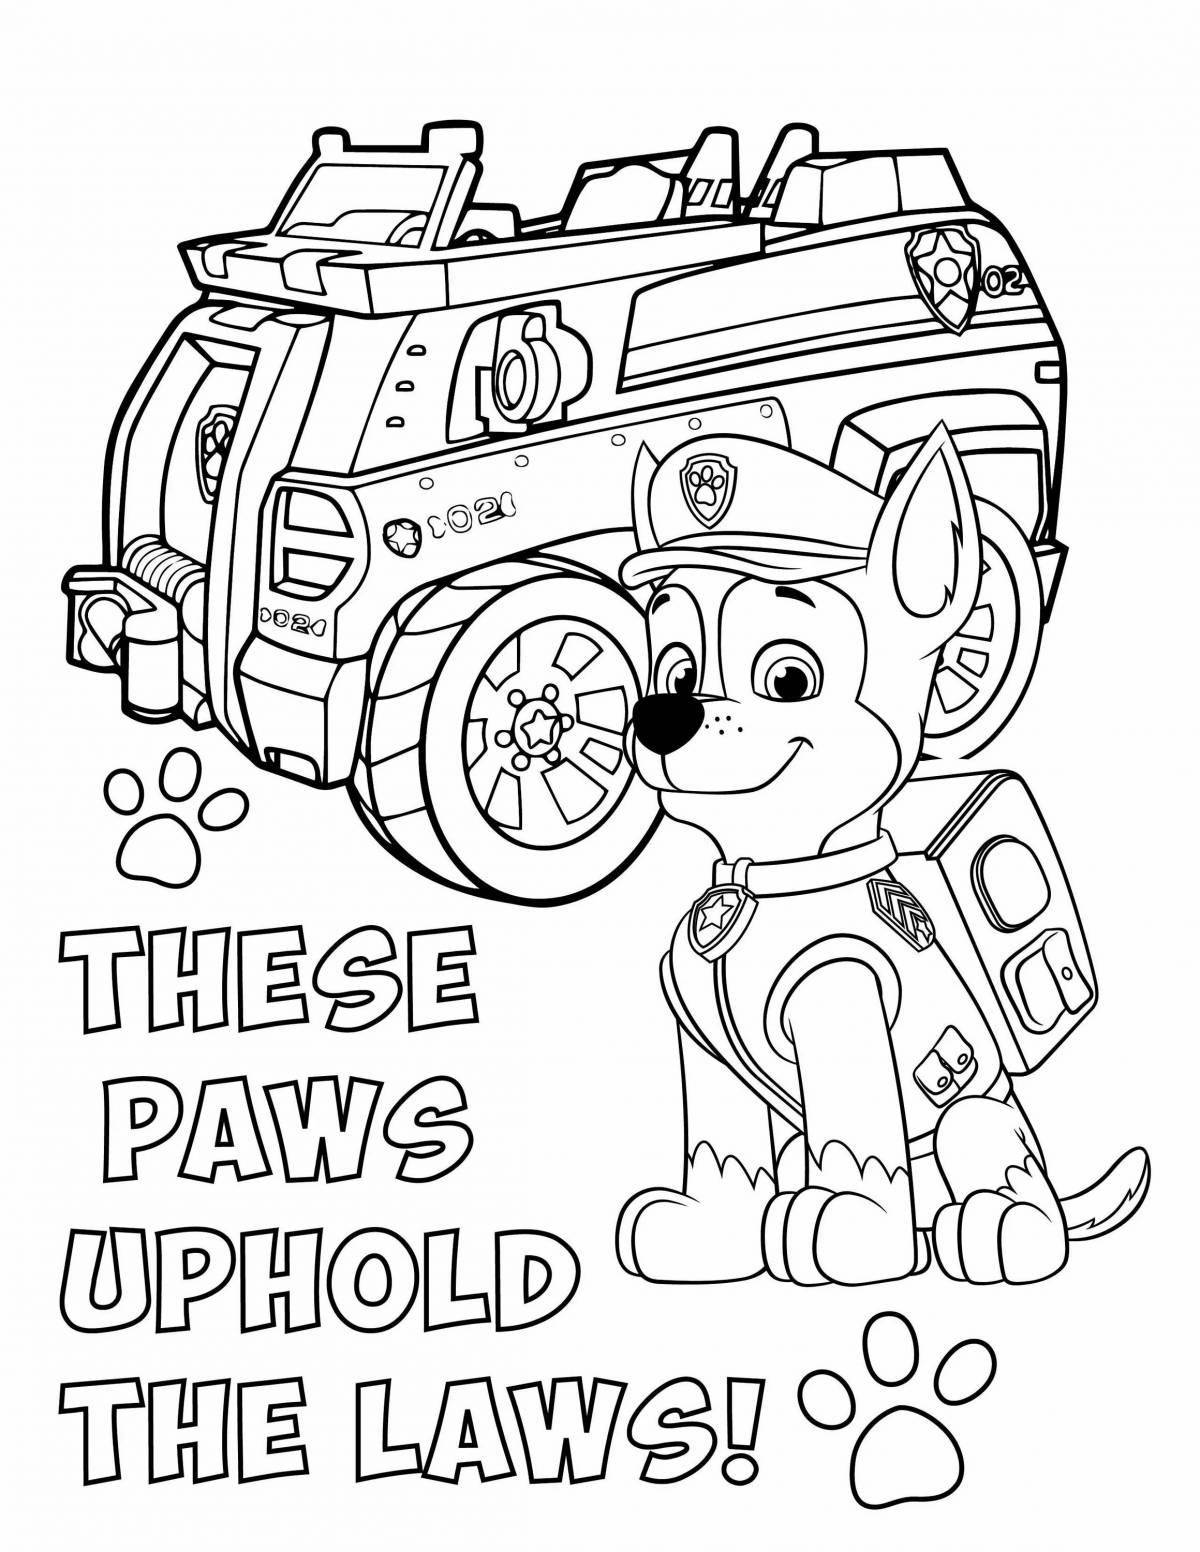 Incredible coloring page paw patrol with cars